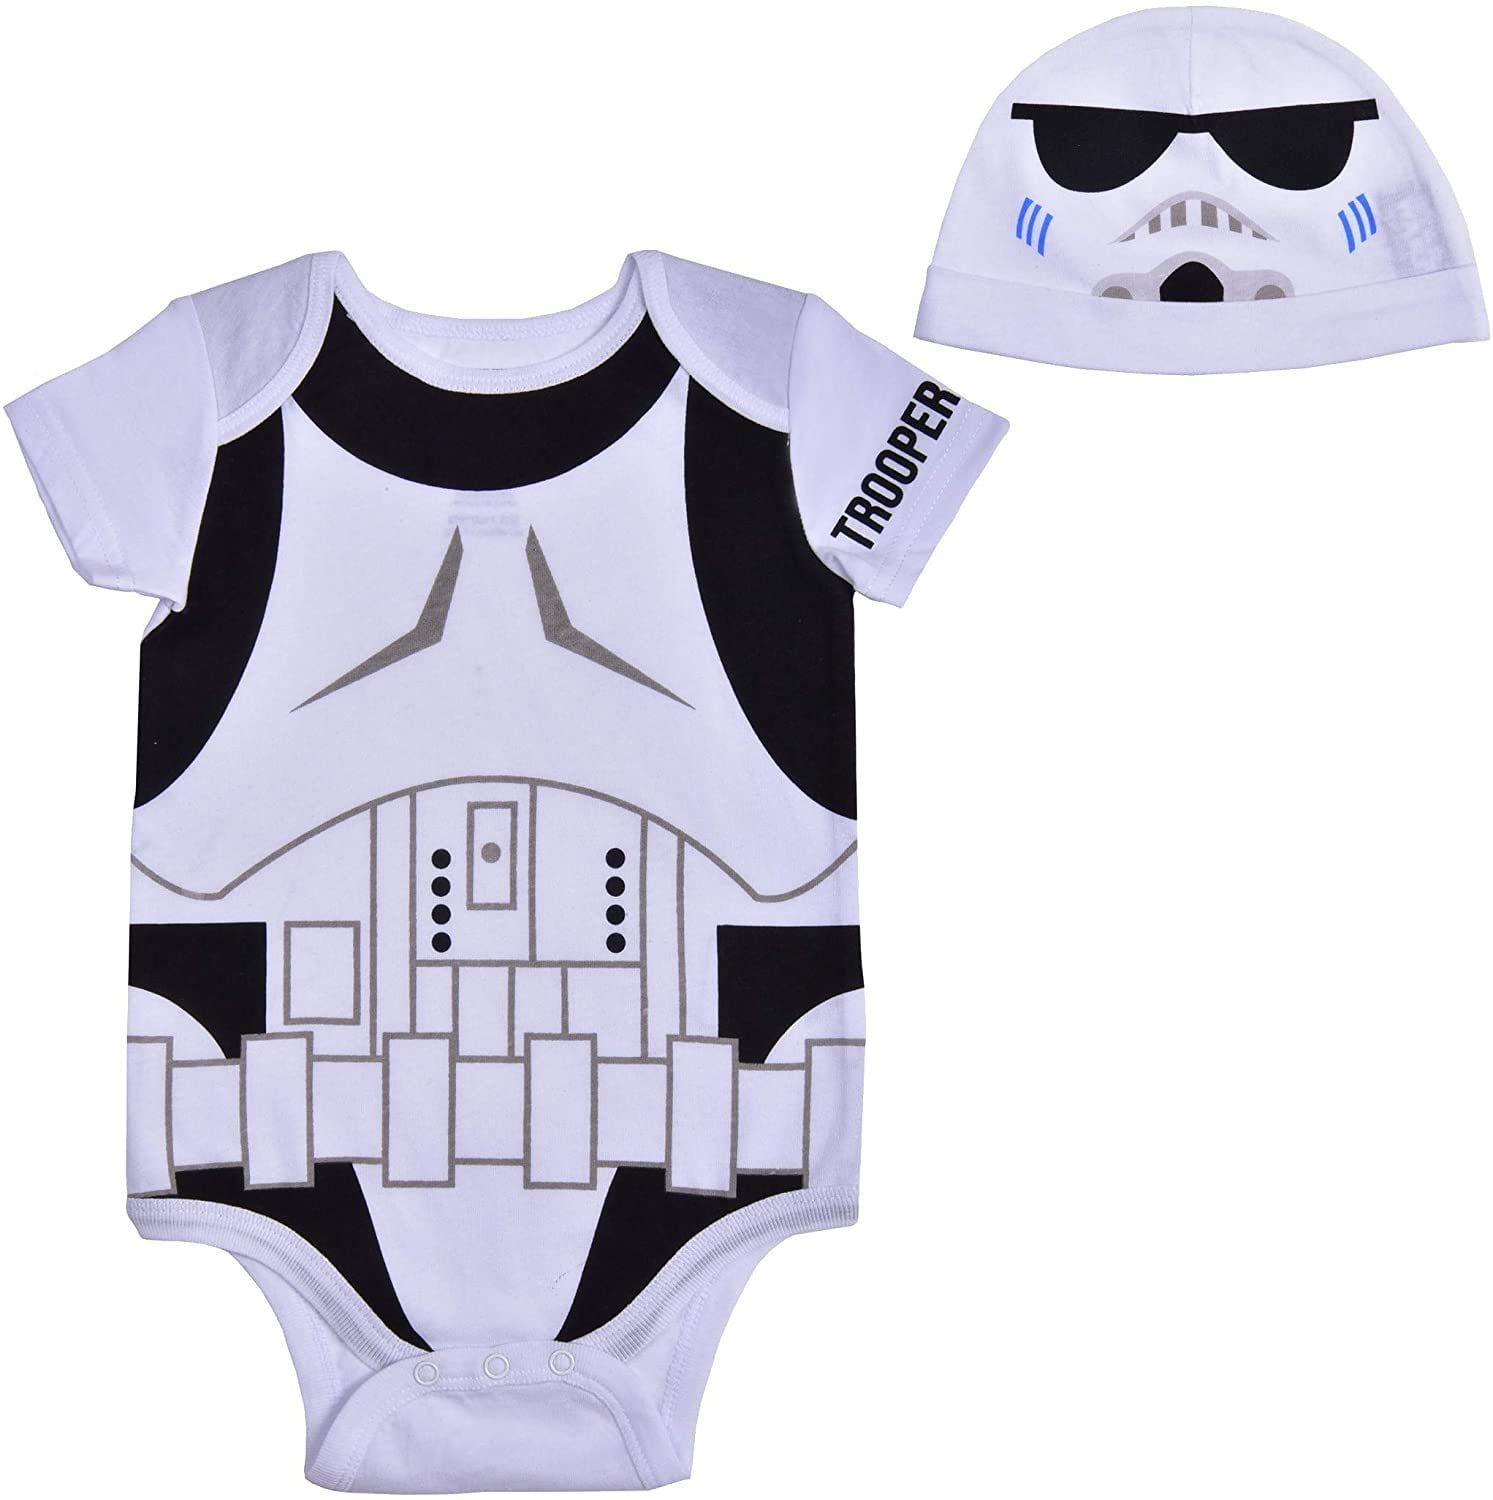  Rubie's unisex baby Star Wars the Mandalorian Child s Costume,  As Shown, X-Small US : Clothing, Shoes & Jewelry